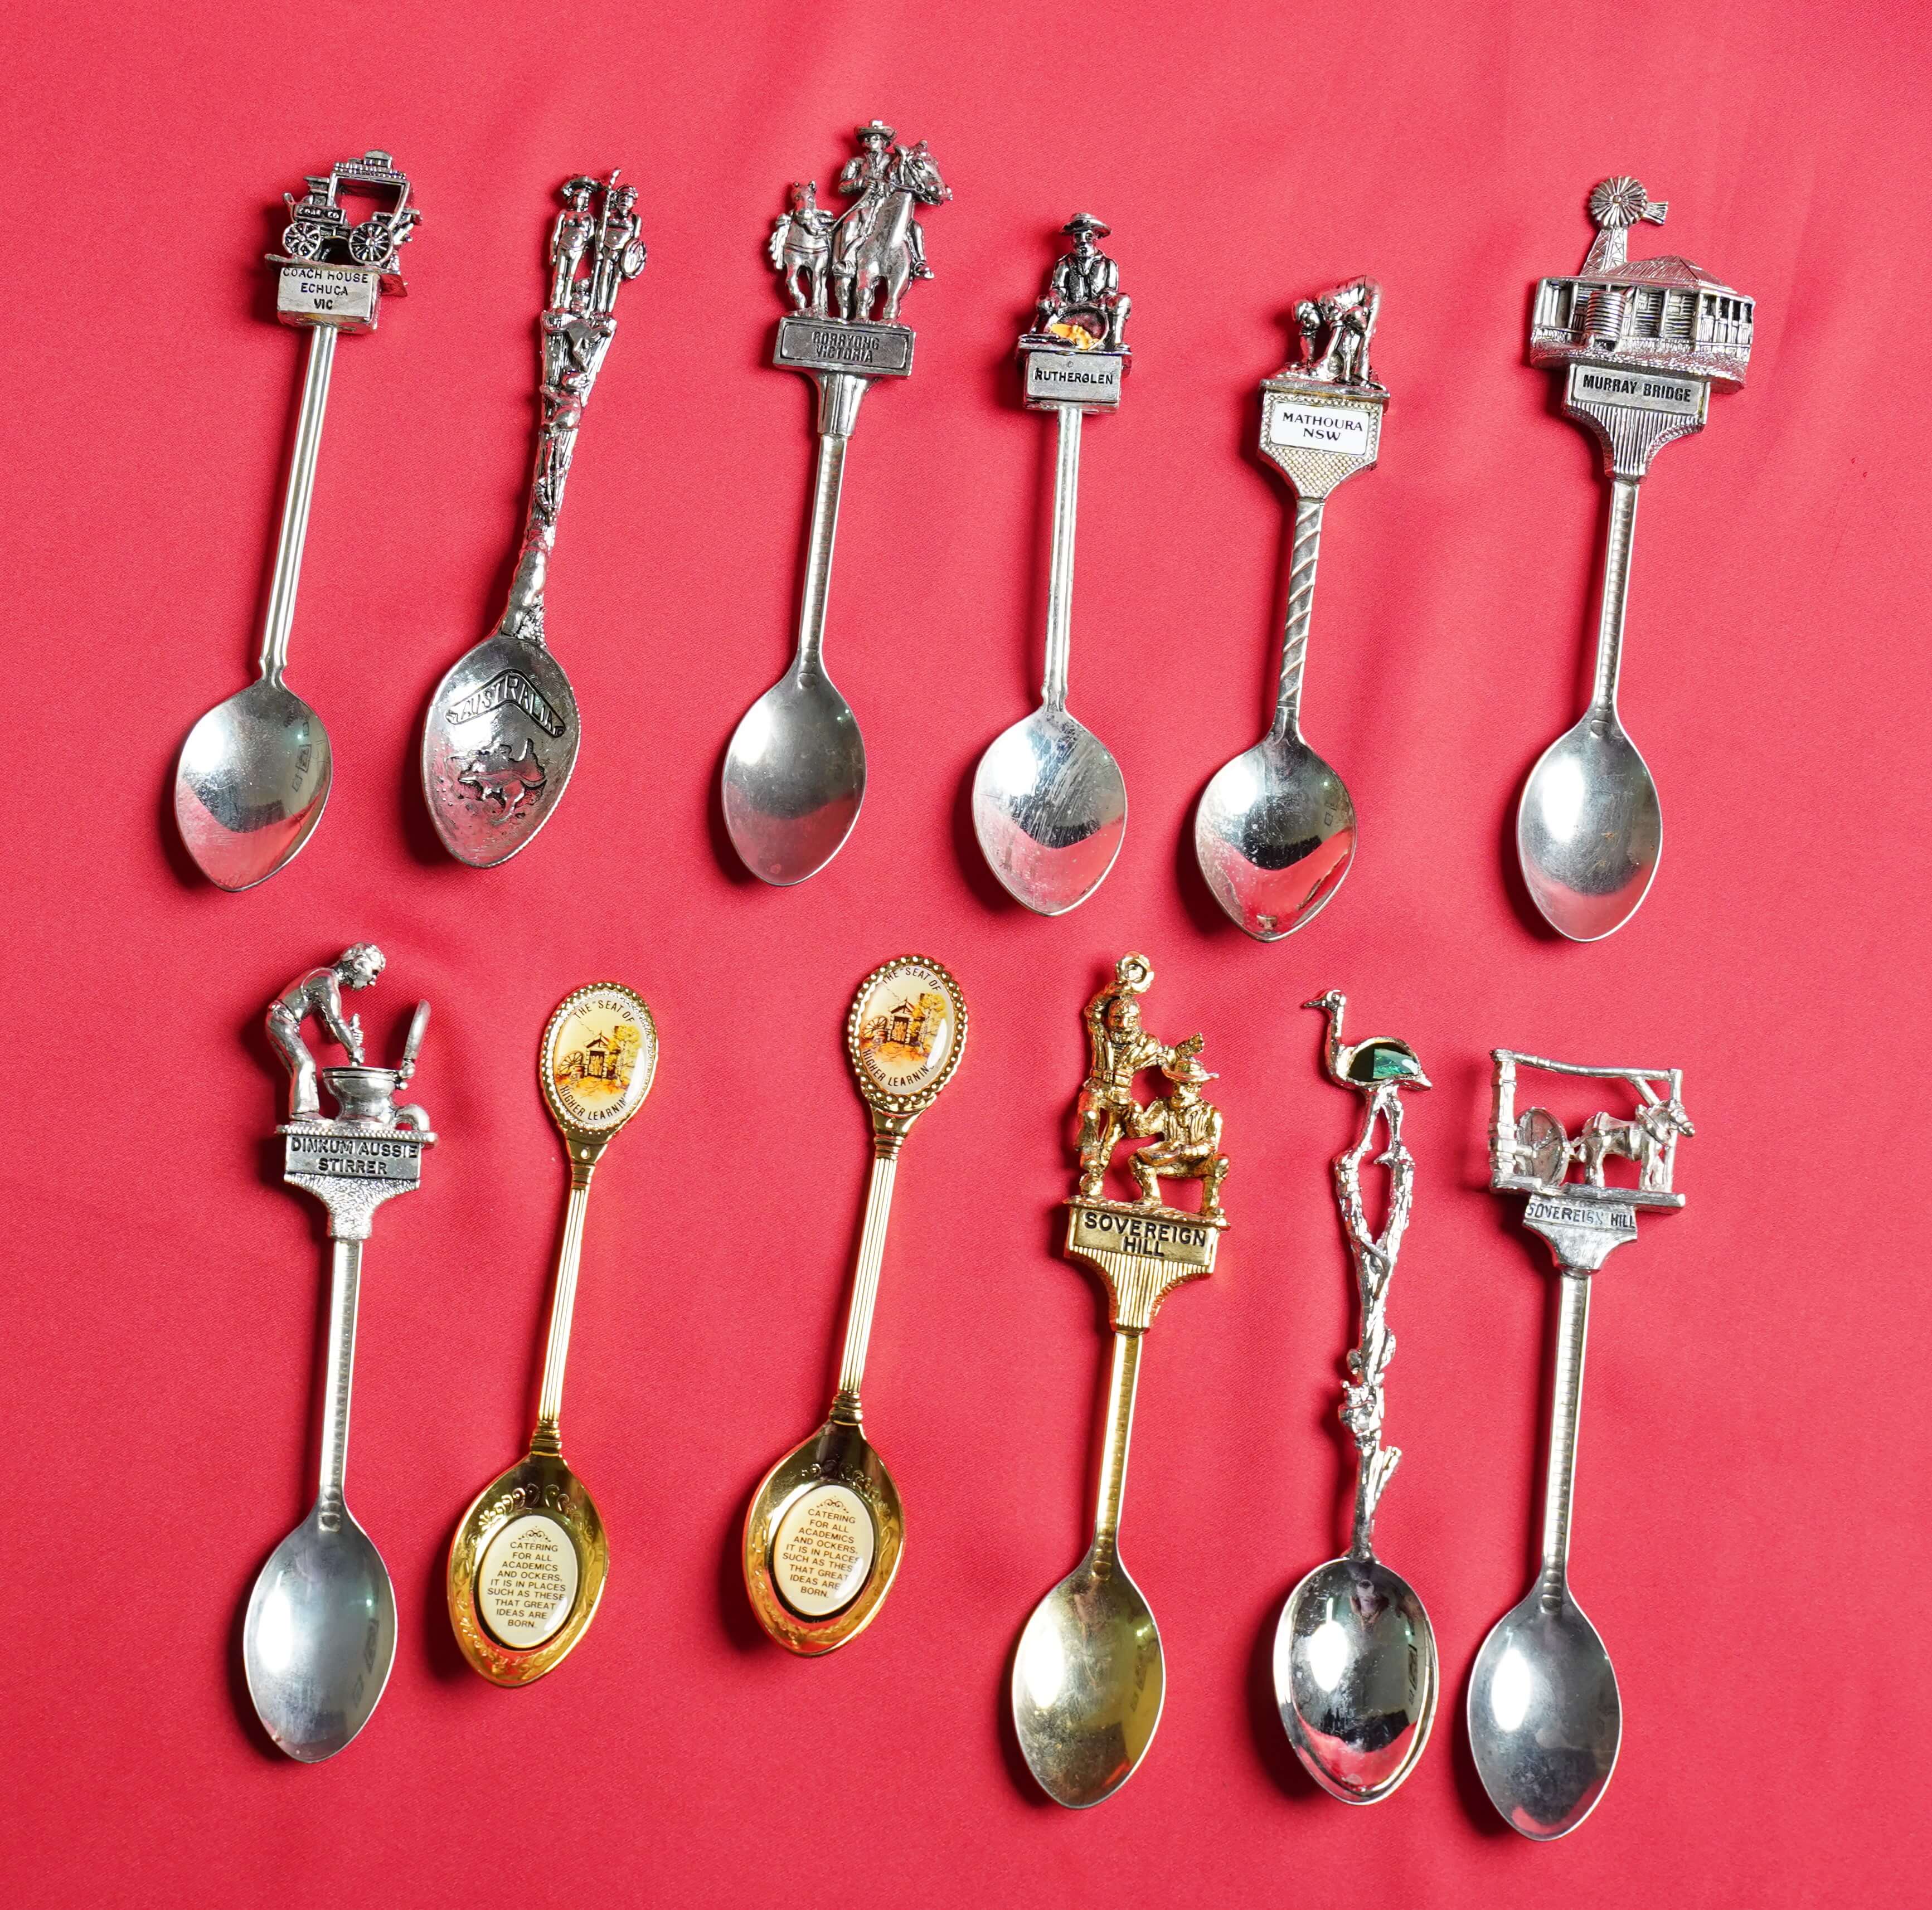 Collectable spoon series from Australia - shopeeeys